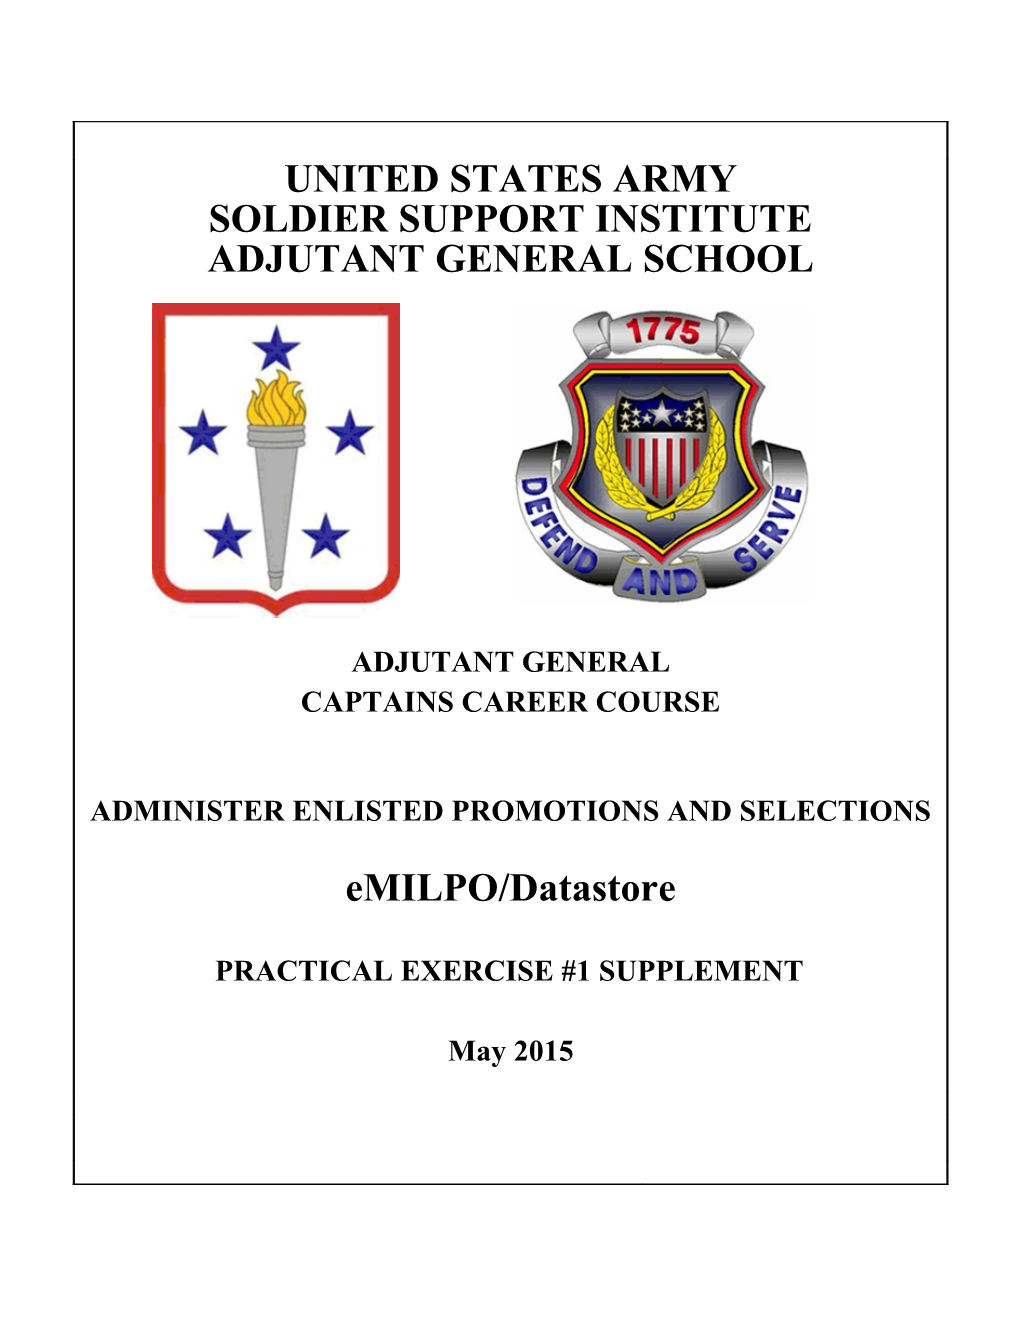 Administer Enlisted Promotions and Selections